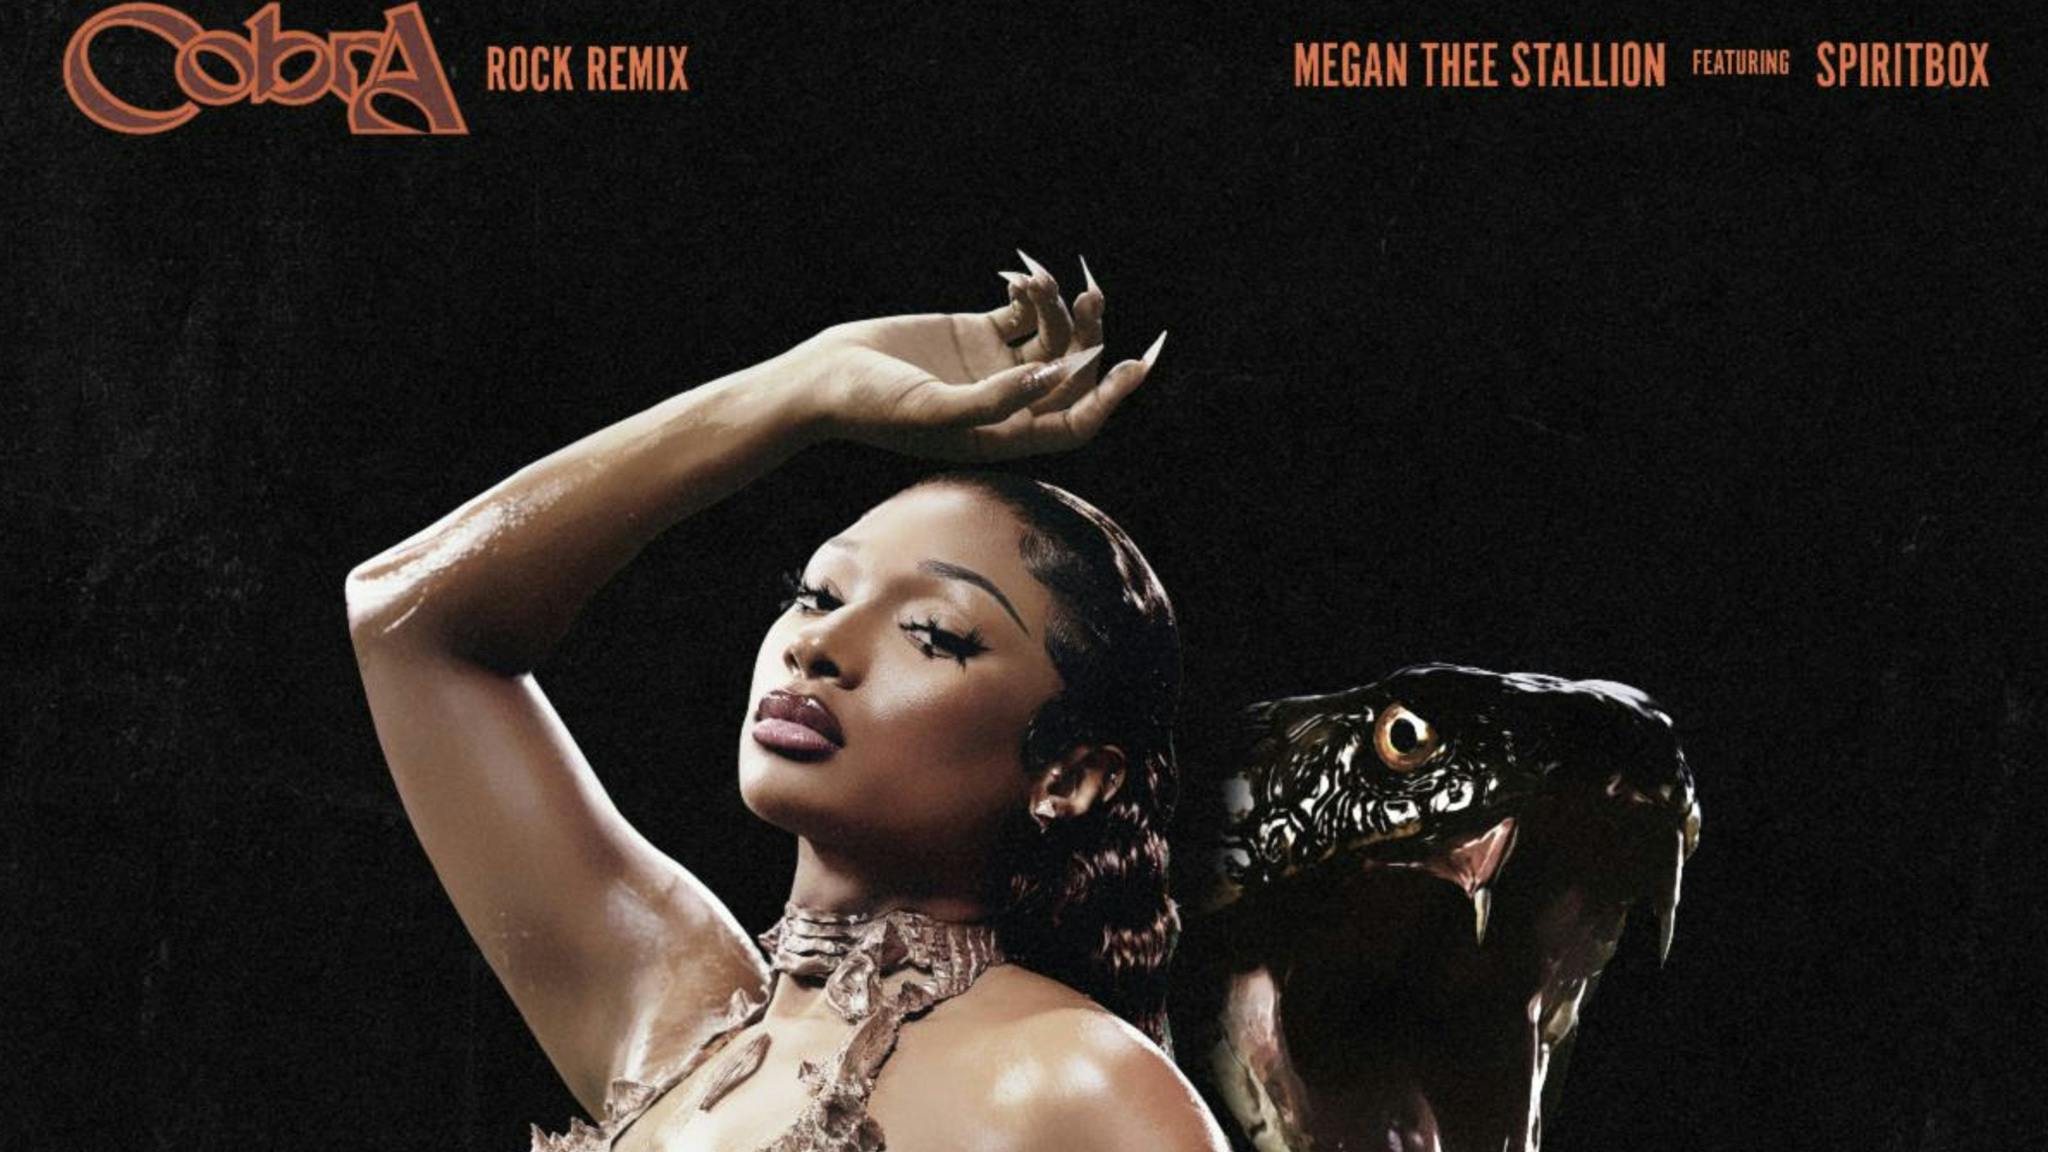 Megan Thee Stallion releases new rock remix with Spiritbox